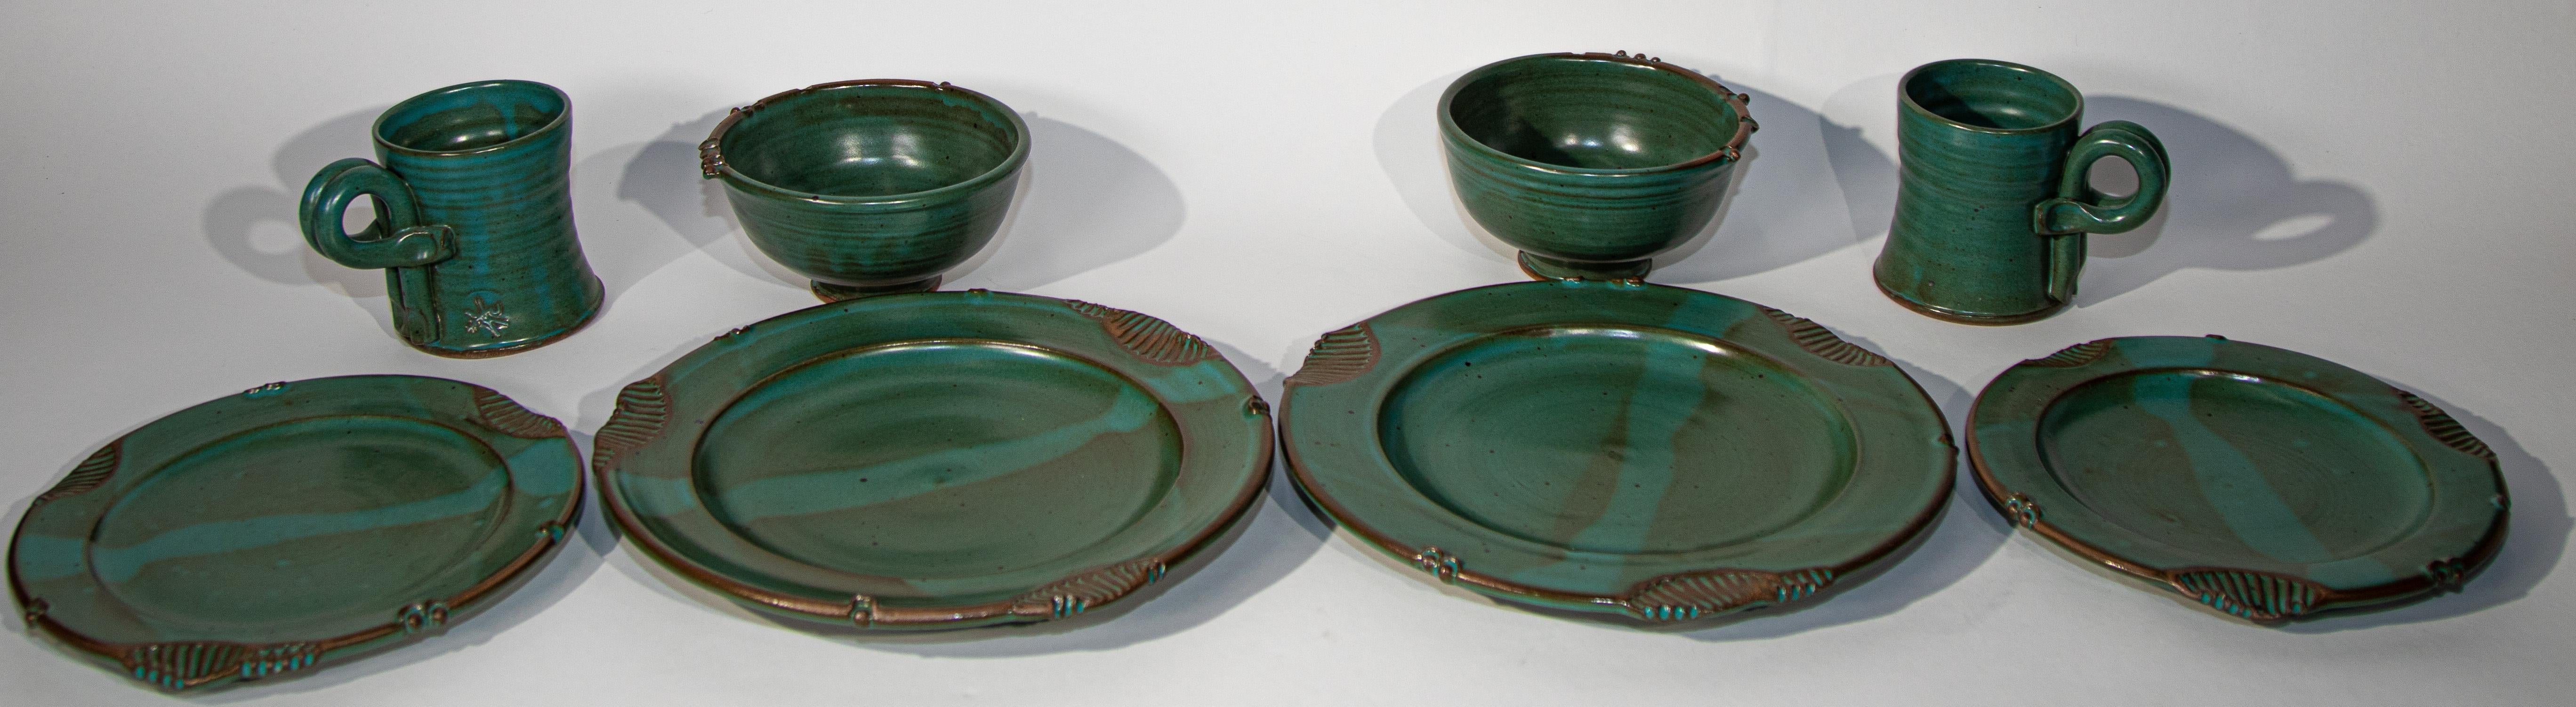 Organic Modern Paul Anthony Vintage Teal Green Stoneware Service Set of 8 For Sale